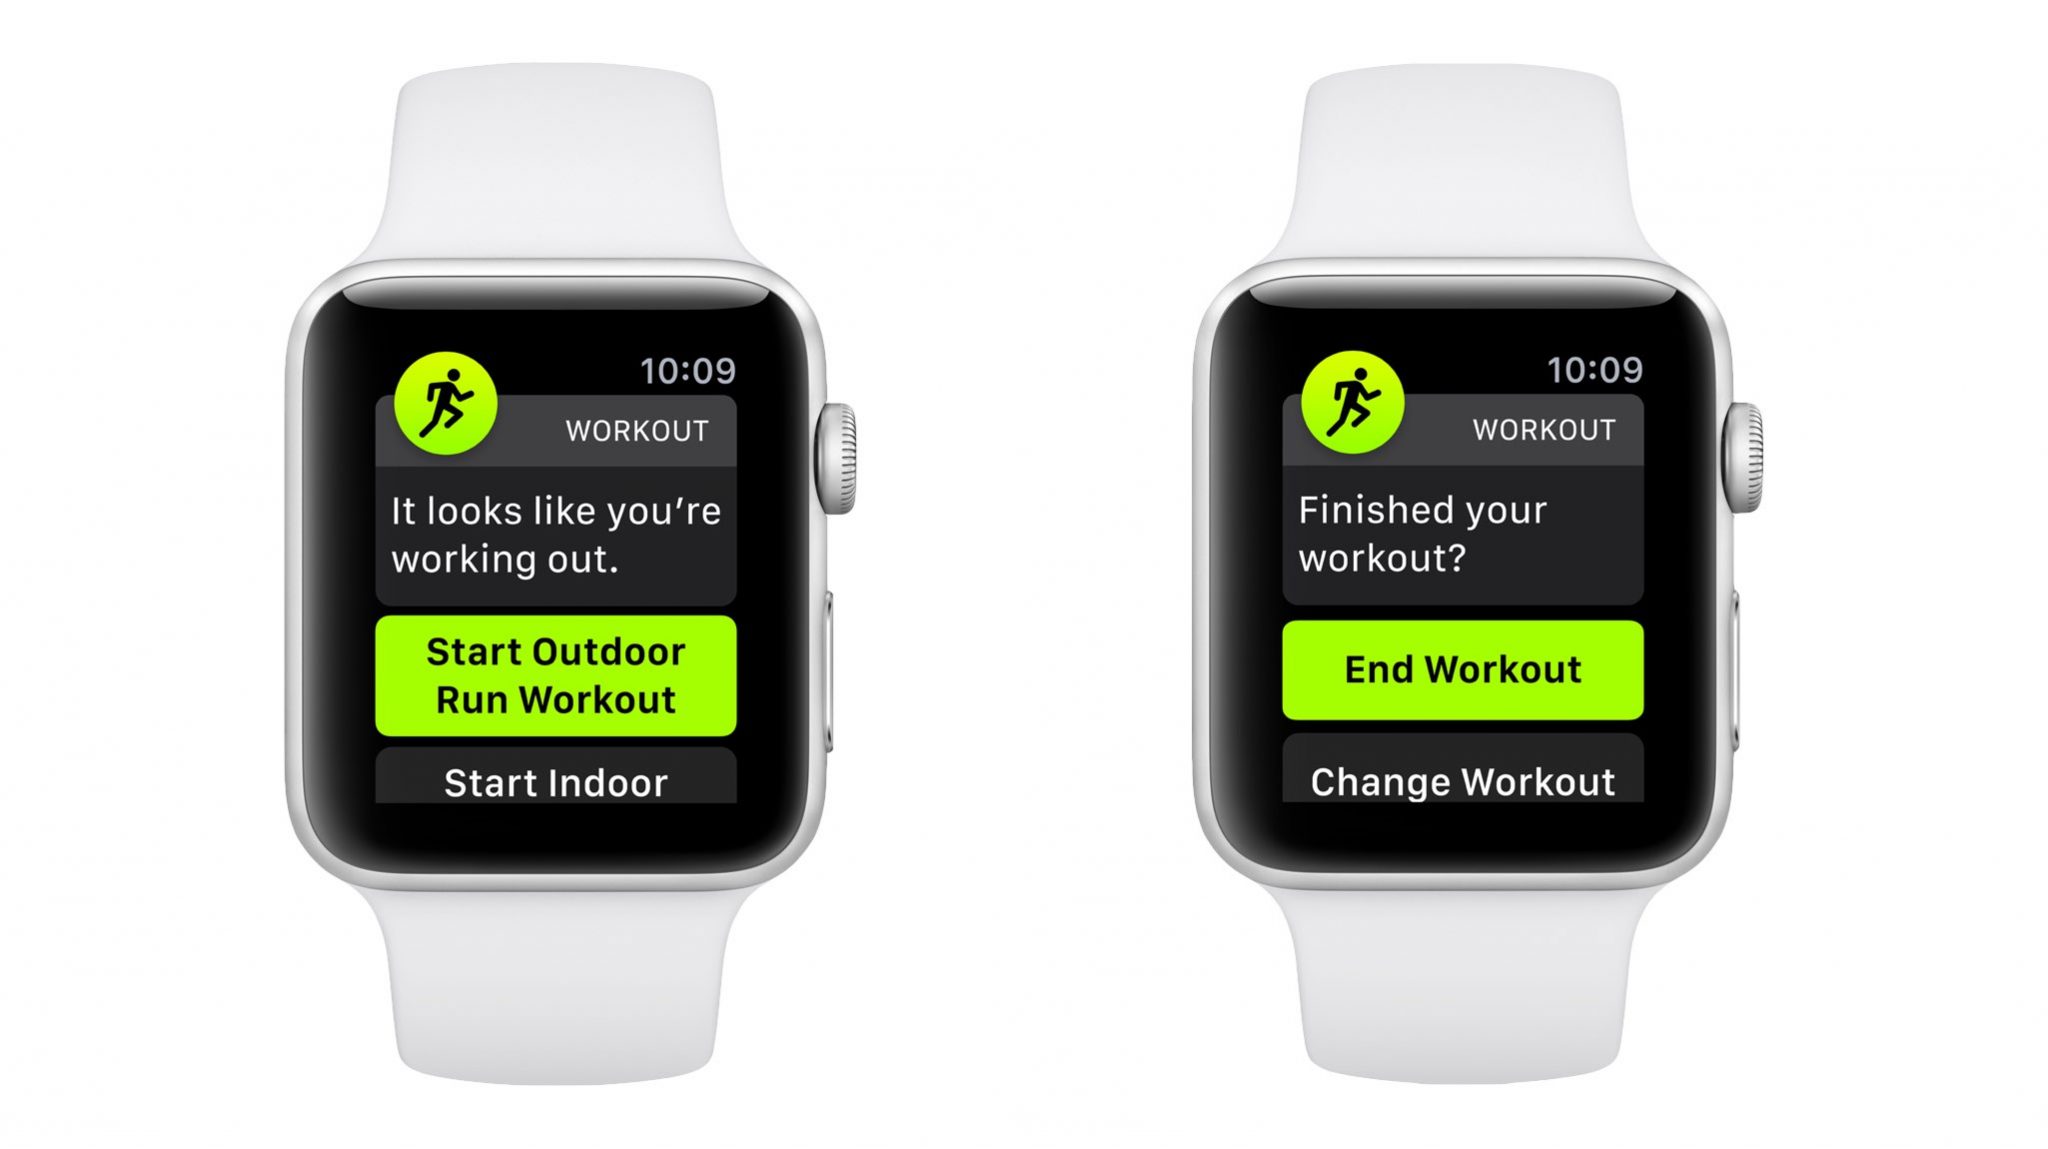 How to disable auto start workout on Apple Watch